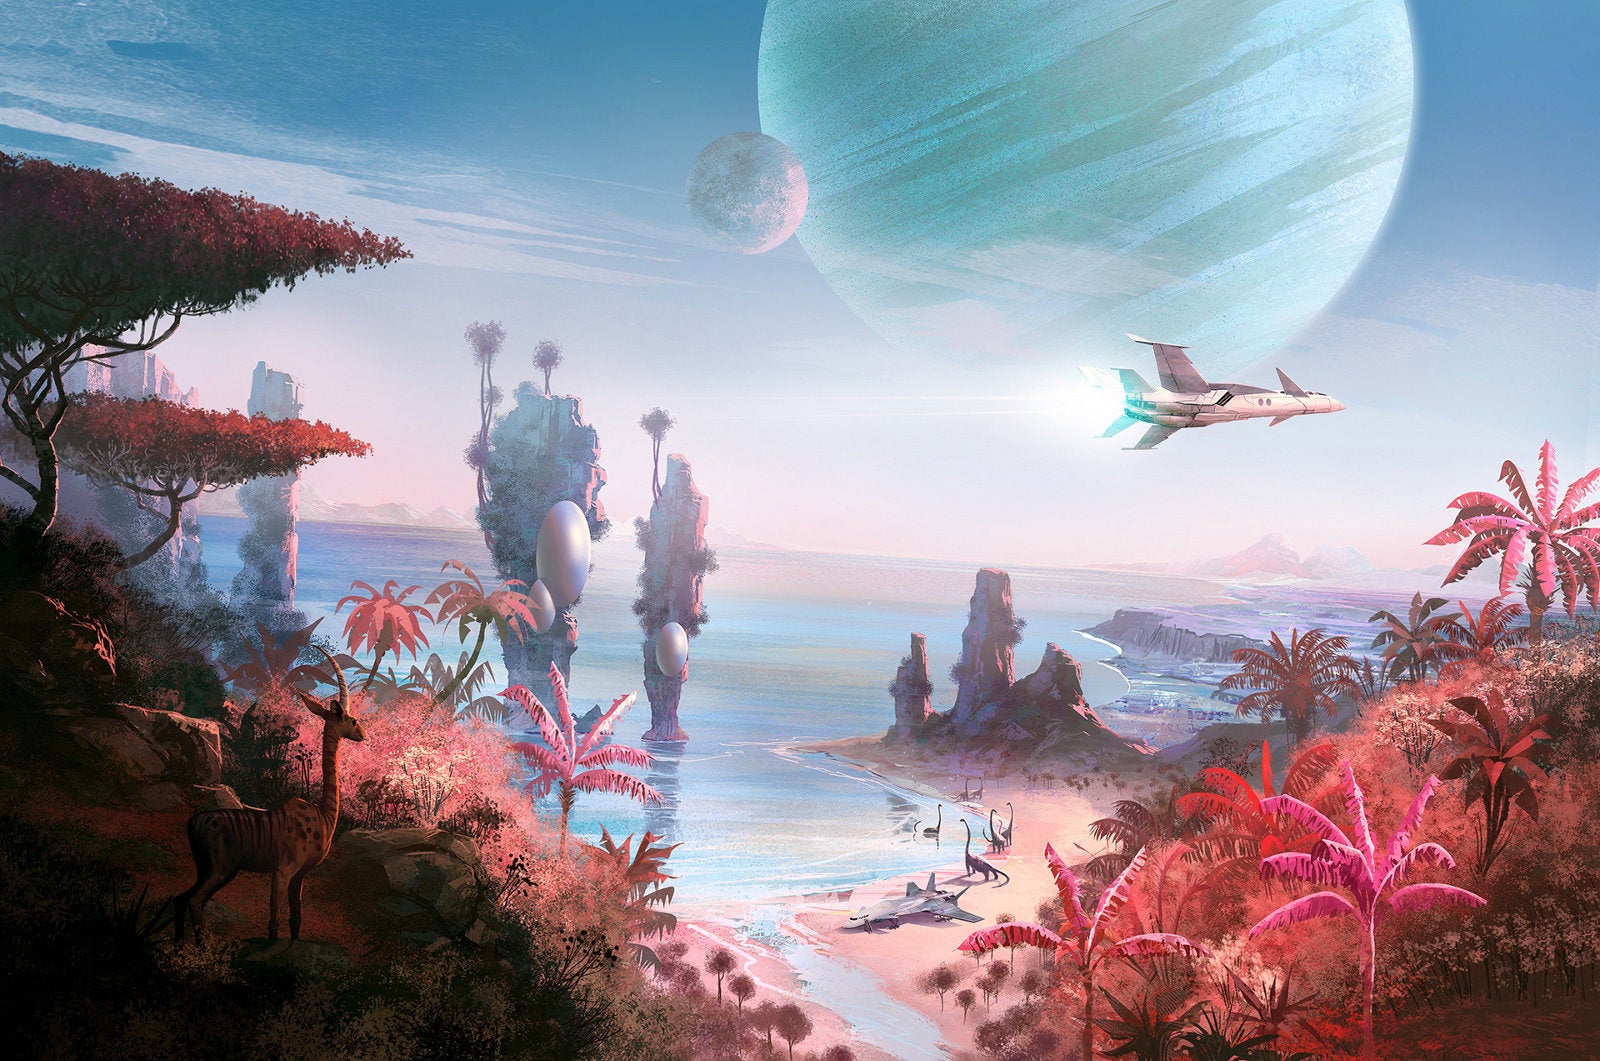 Image for No Man's Sky gameplay footage shown at E3